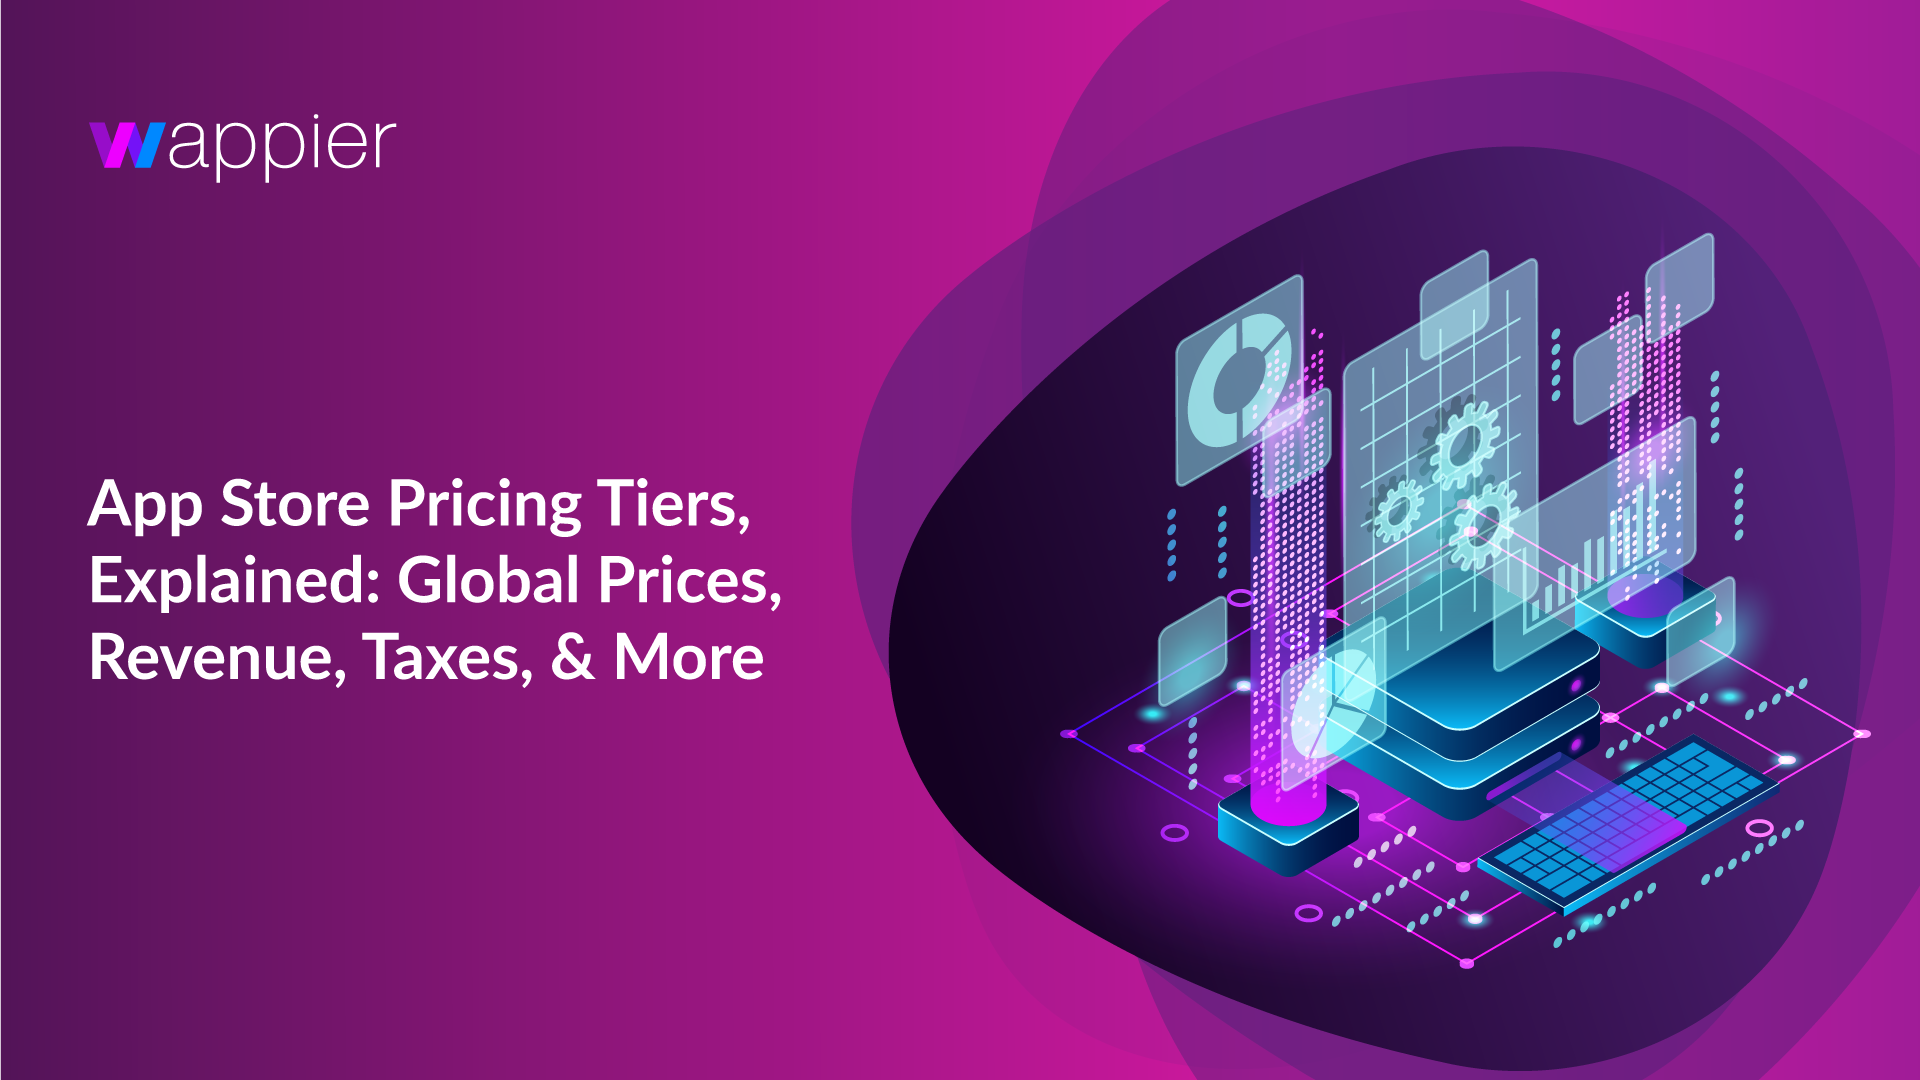 You are currently viewing App Store Pricing Tiers, Explained: Global Prices, Revenue, Taxes, & More